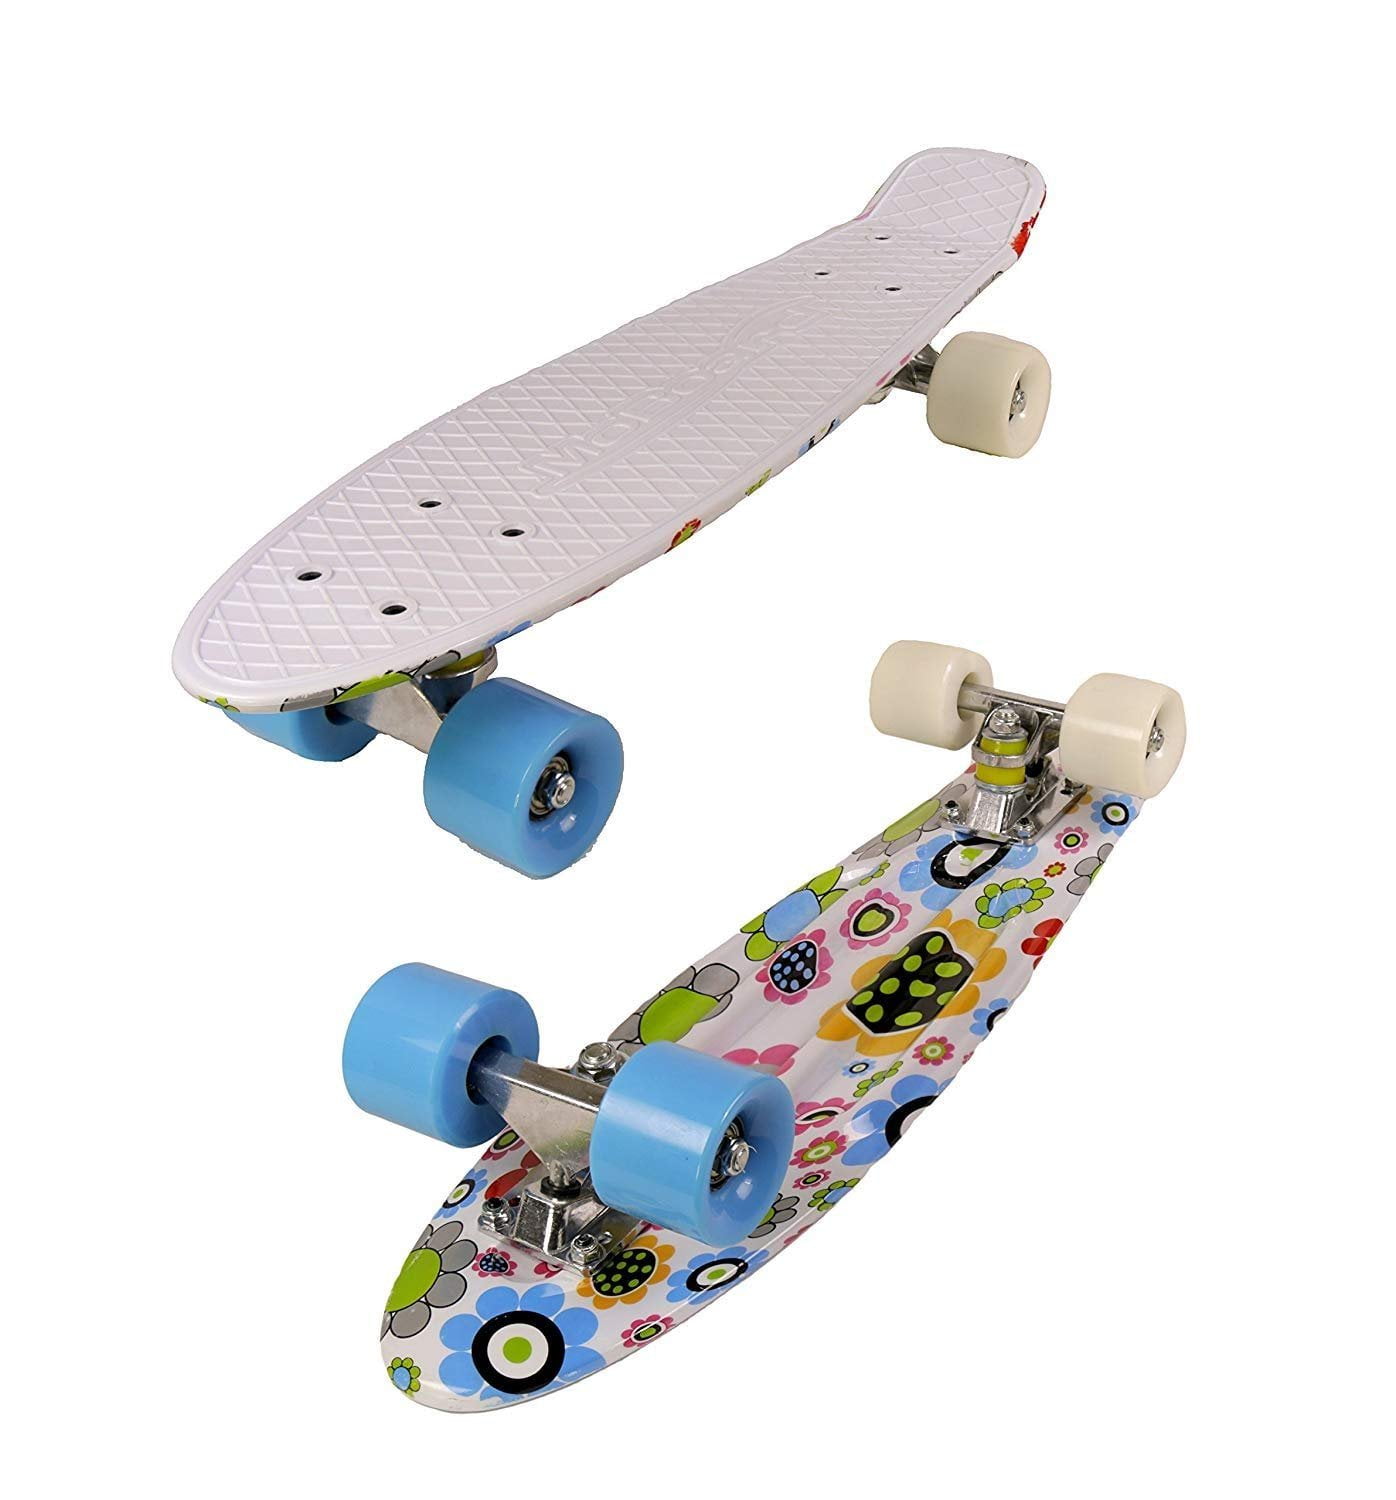 MoBoard Graphic Complete Skateboard | Pro/Beginner | 22 inch Vintage Style with Interchangeable Wheels (White Top/Graphic - Blue/White)